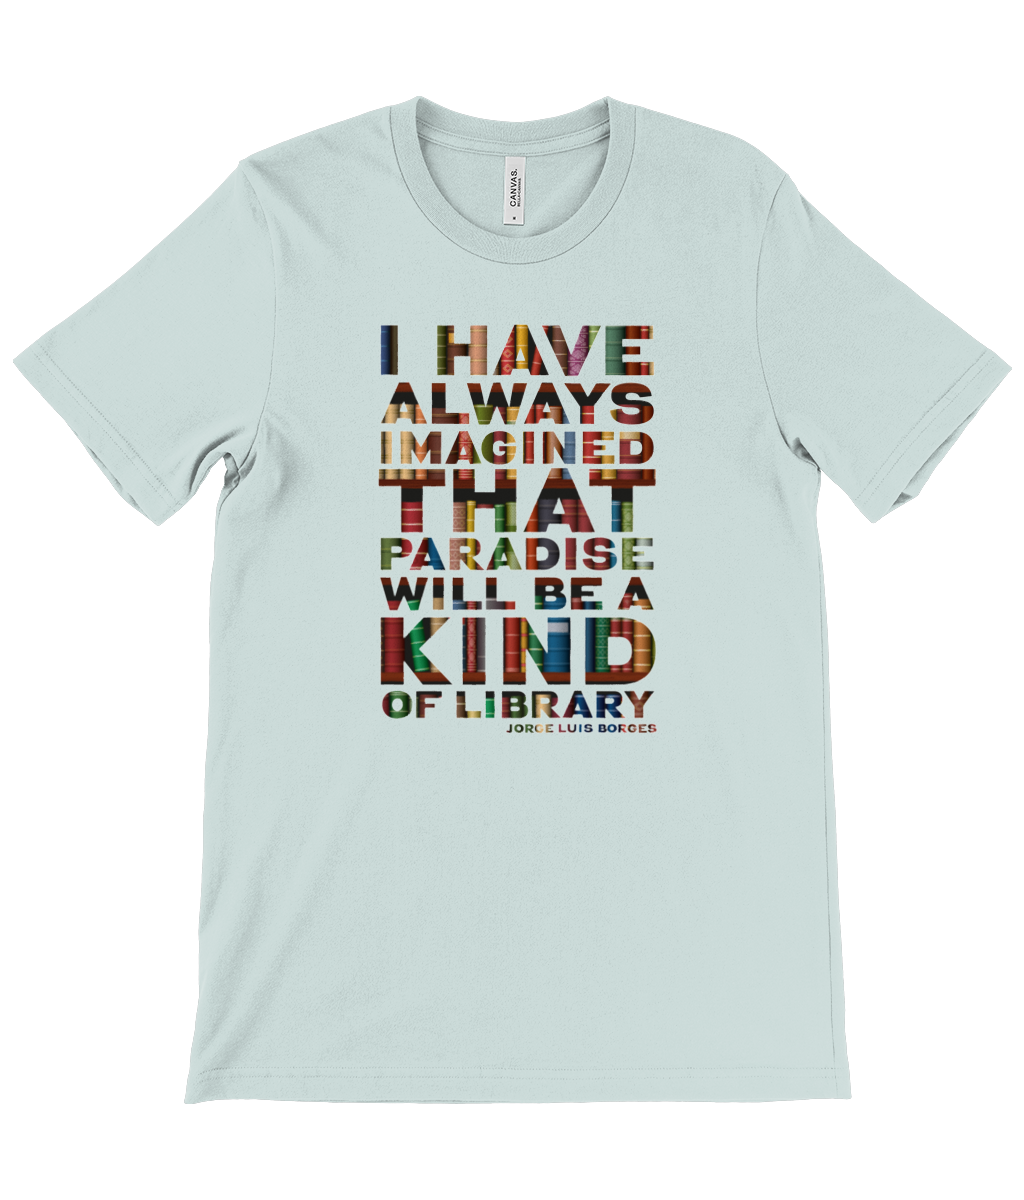 Canvas Unisex Crew Neck T-Shirt Paradise "I have always imagined that paradise will be a kind of library."